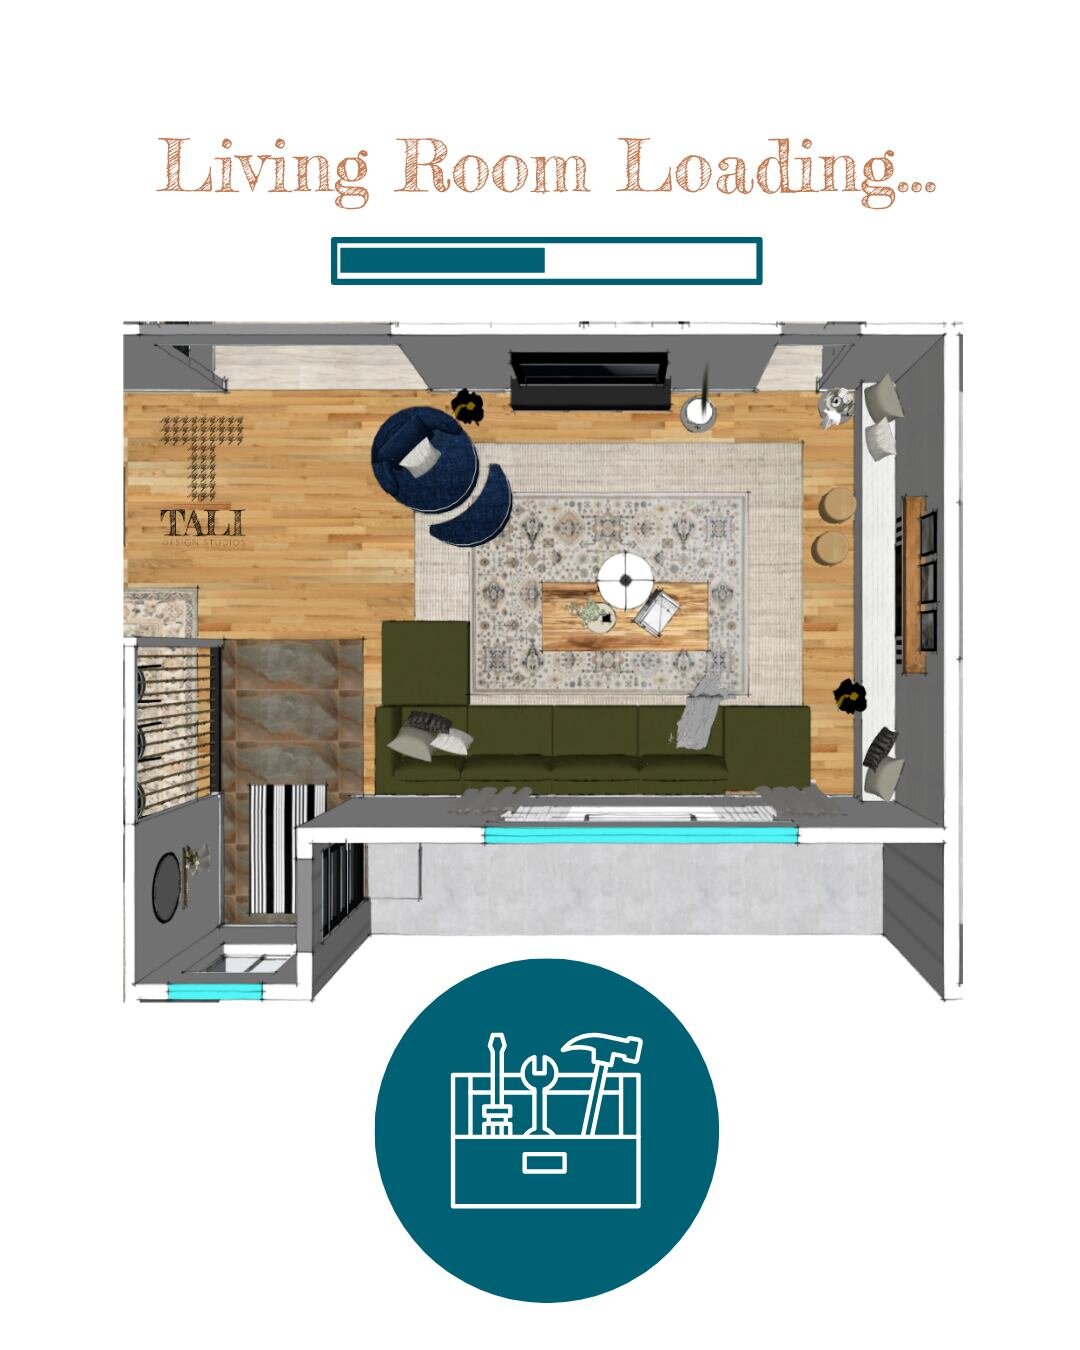 Help a Designer Out! &zwj;
Getting ready for a BIG install next week - can't WAIT to see this living room come to life.... Let's lift the lid on those designer toolkits!  Share your go-to tools for a smooth install day in the comments. Bonus points f